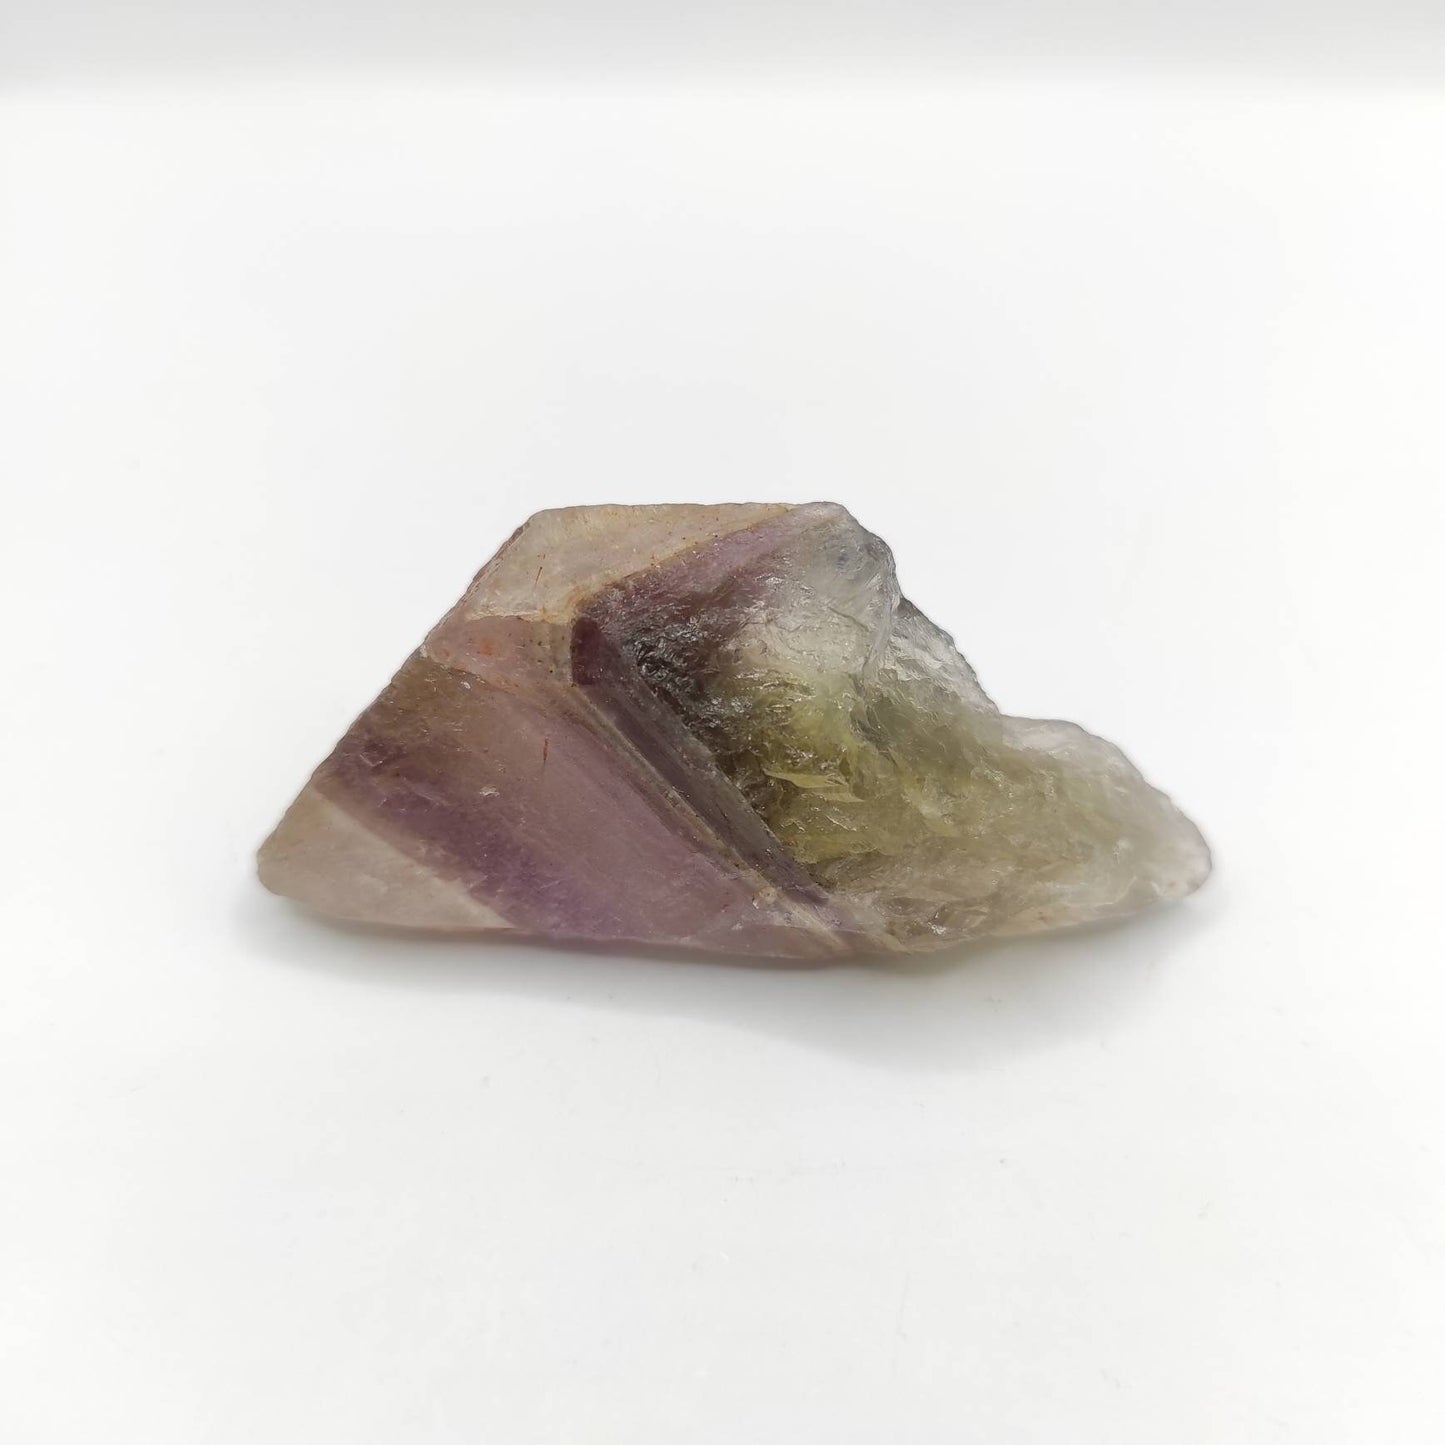 27g Genuine Auralite 23 with Natural Green Amethyst - Rare Unheated Green Amethyst - Thunder Bay Amethyst - Ethical Crystals from Canada